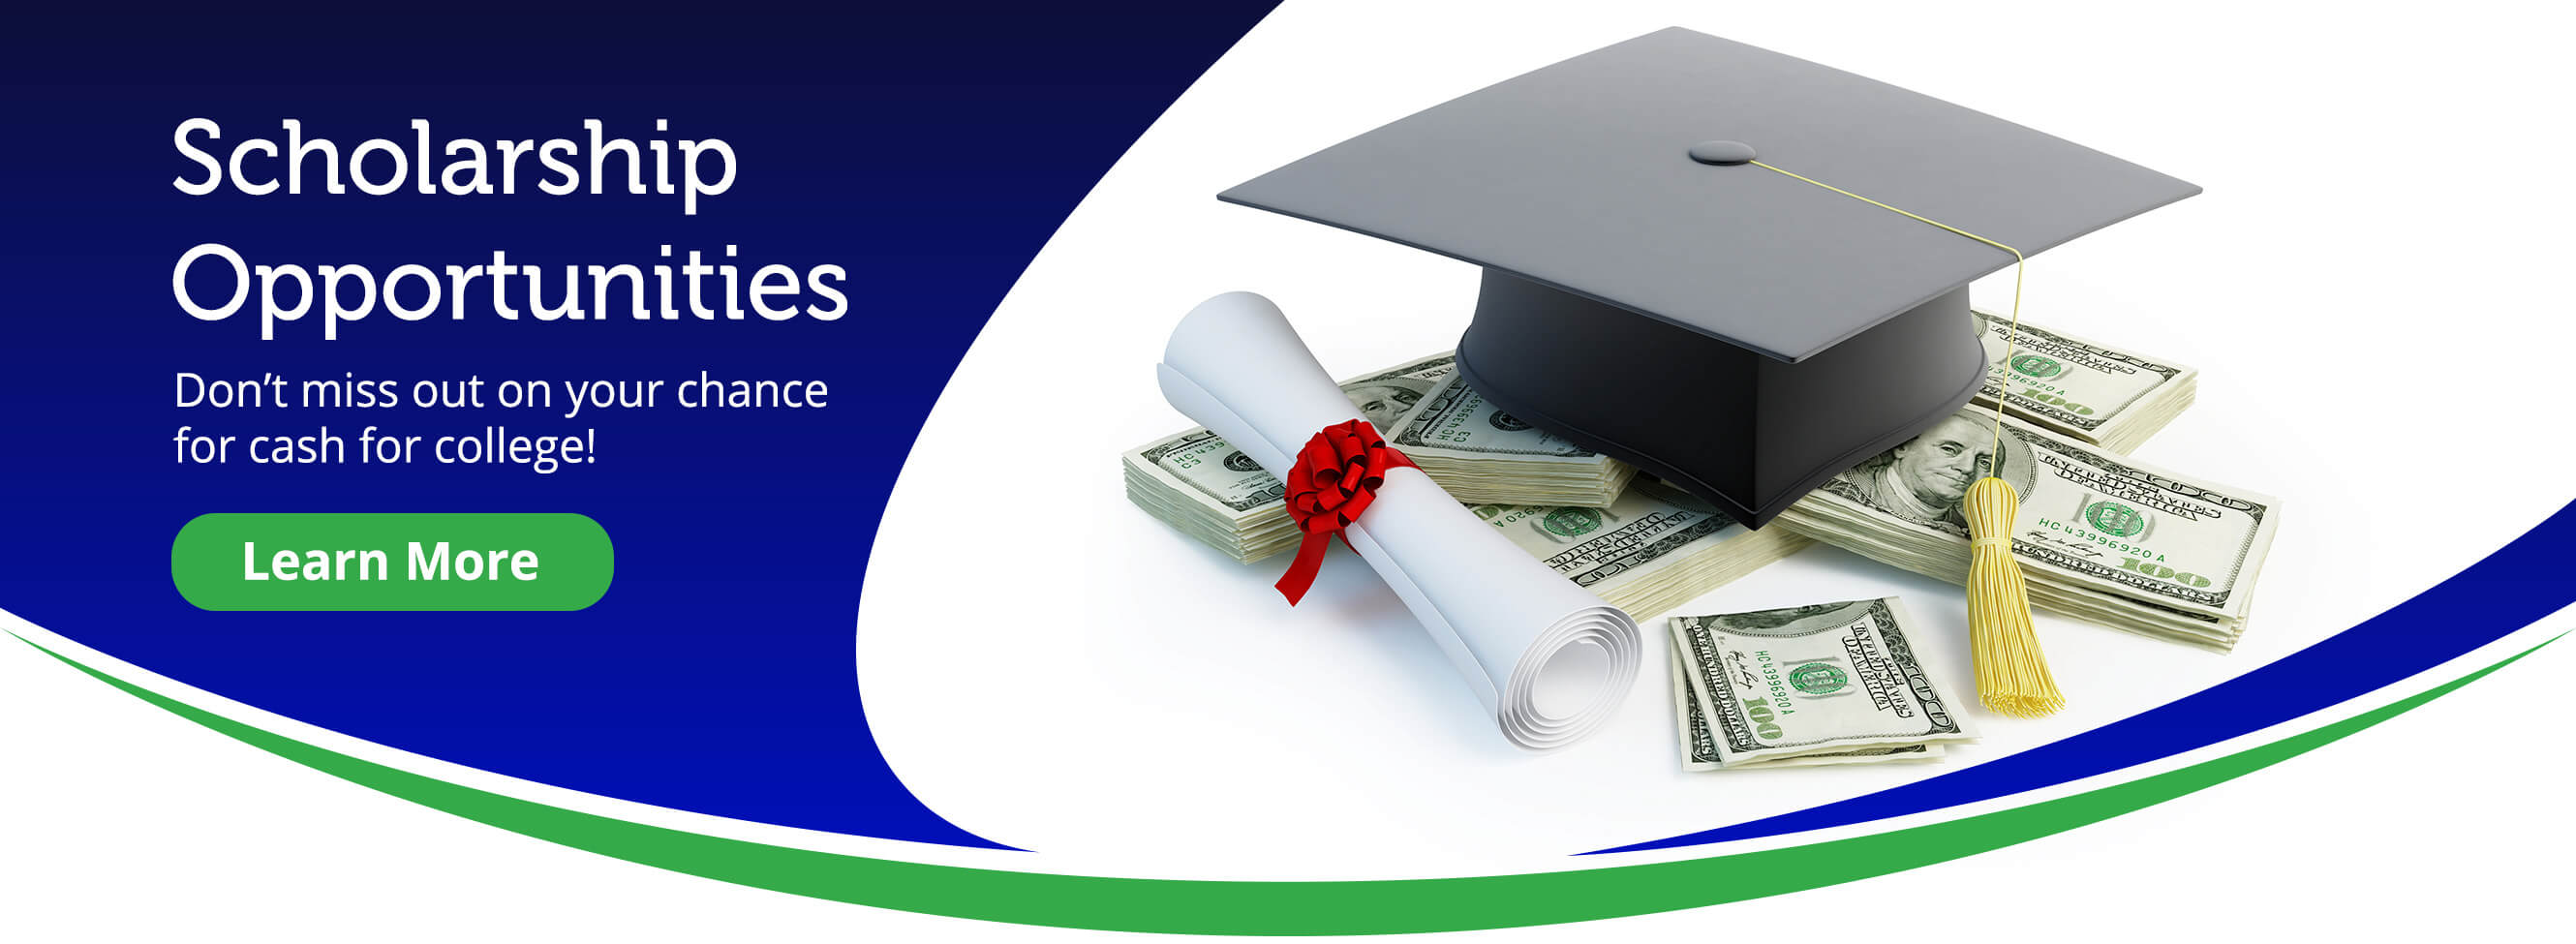 scholarship opportunities don't miss out on your chance for cash for college! learn more